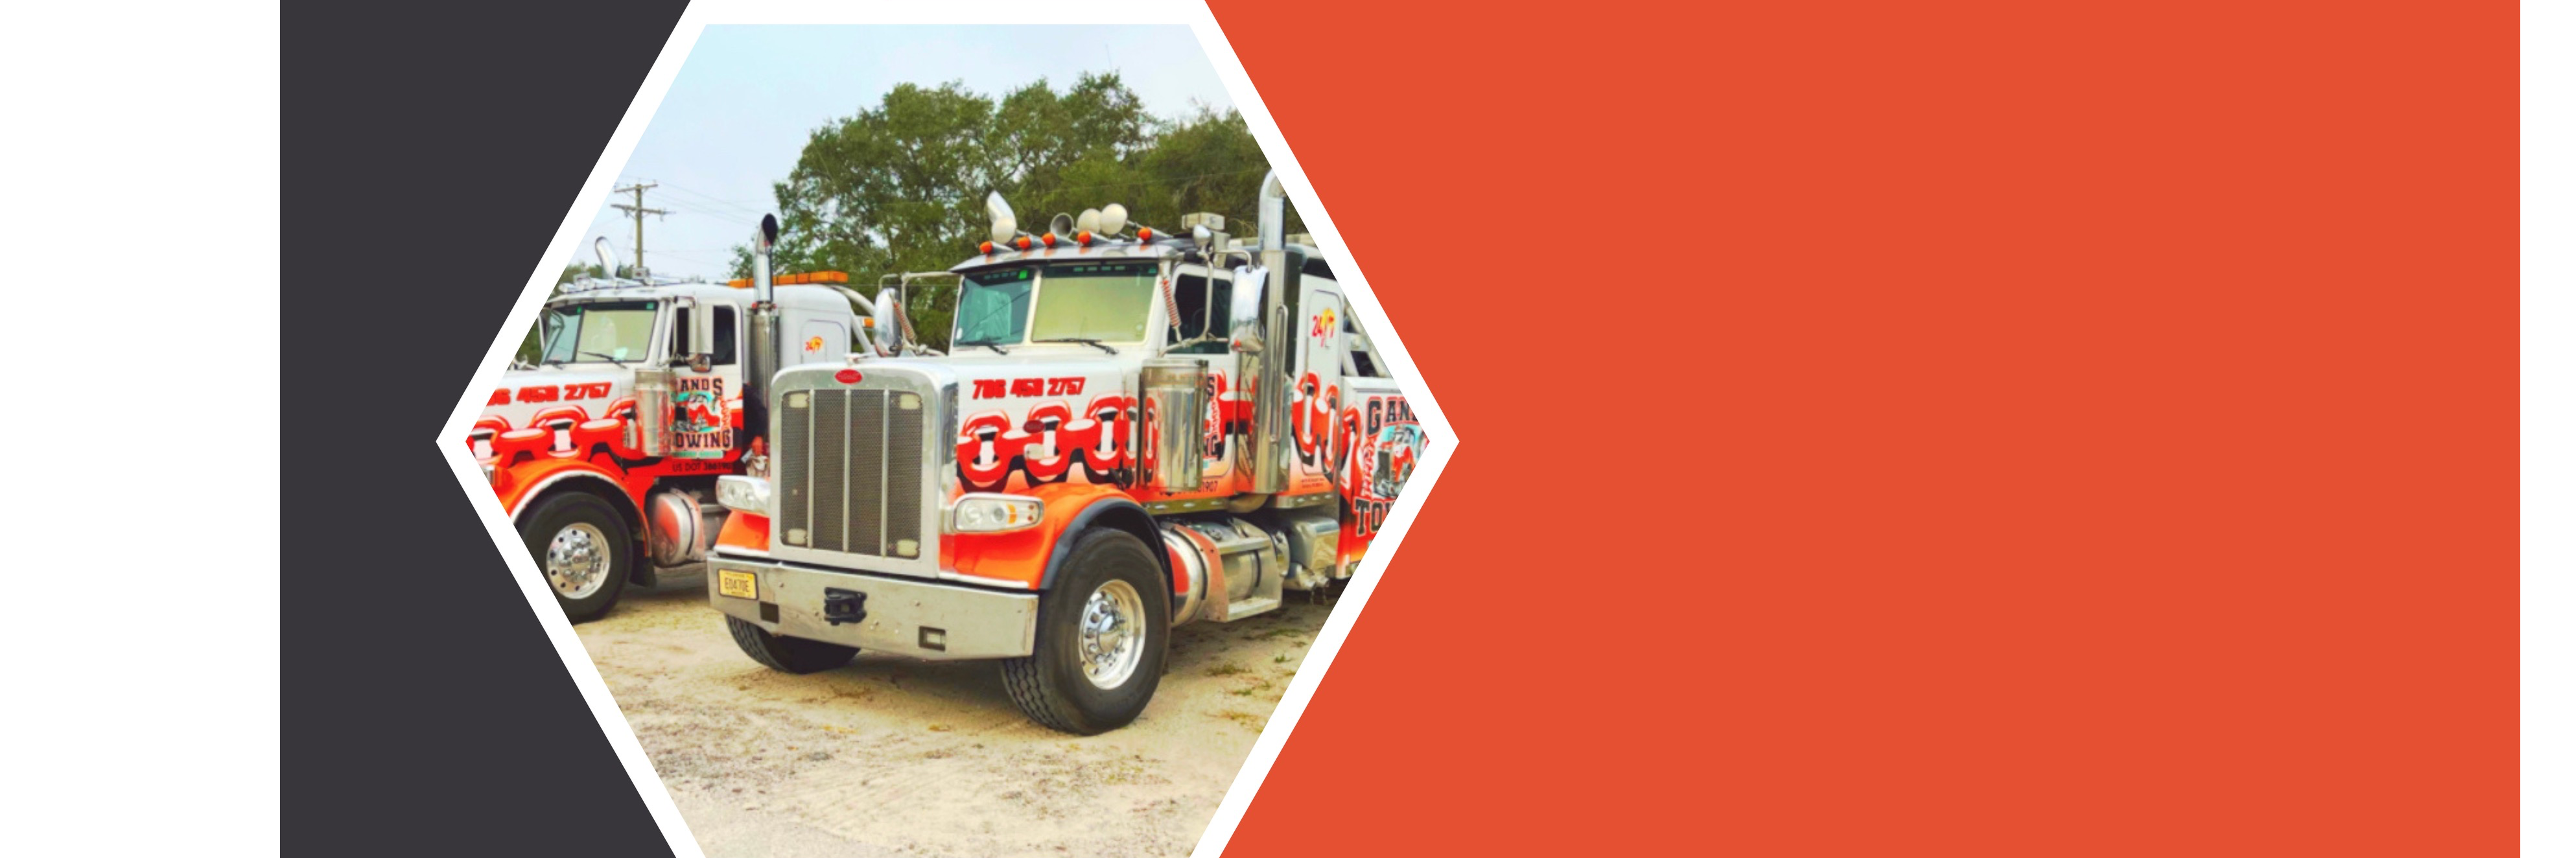 G & S TOWING RECOVERY SERVICES Towing.com Profile Banner